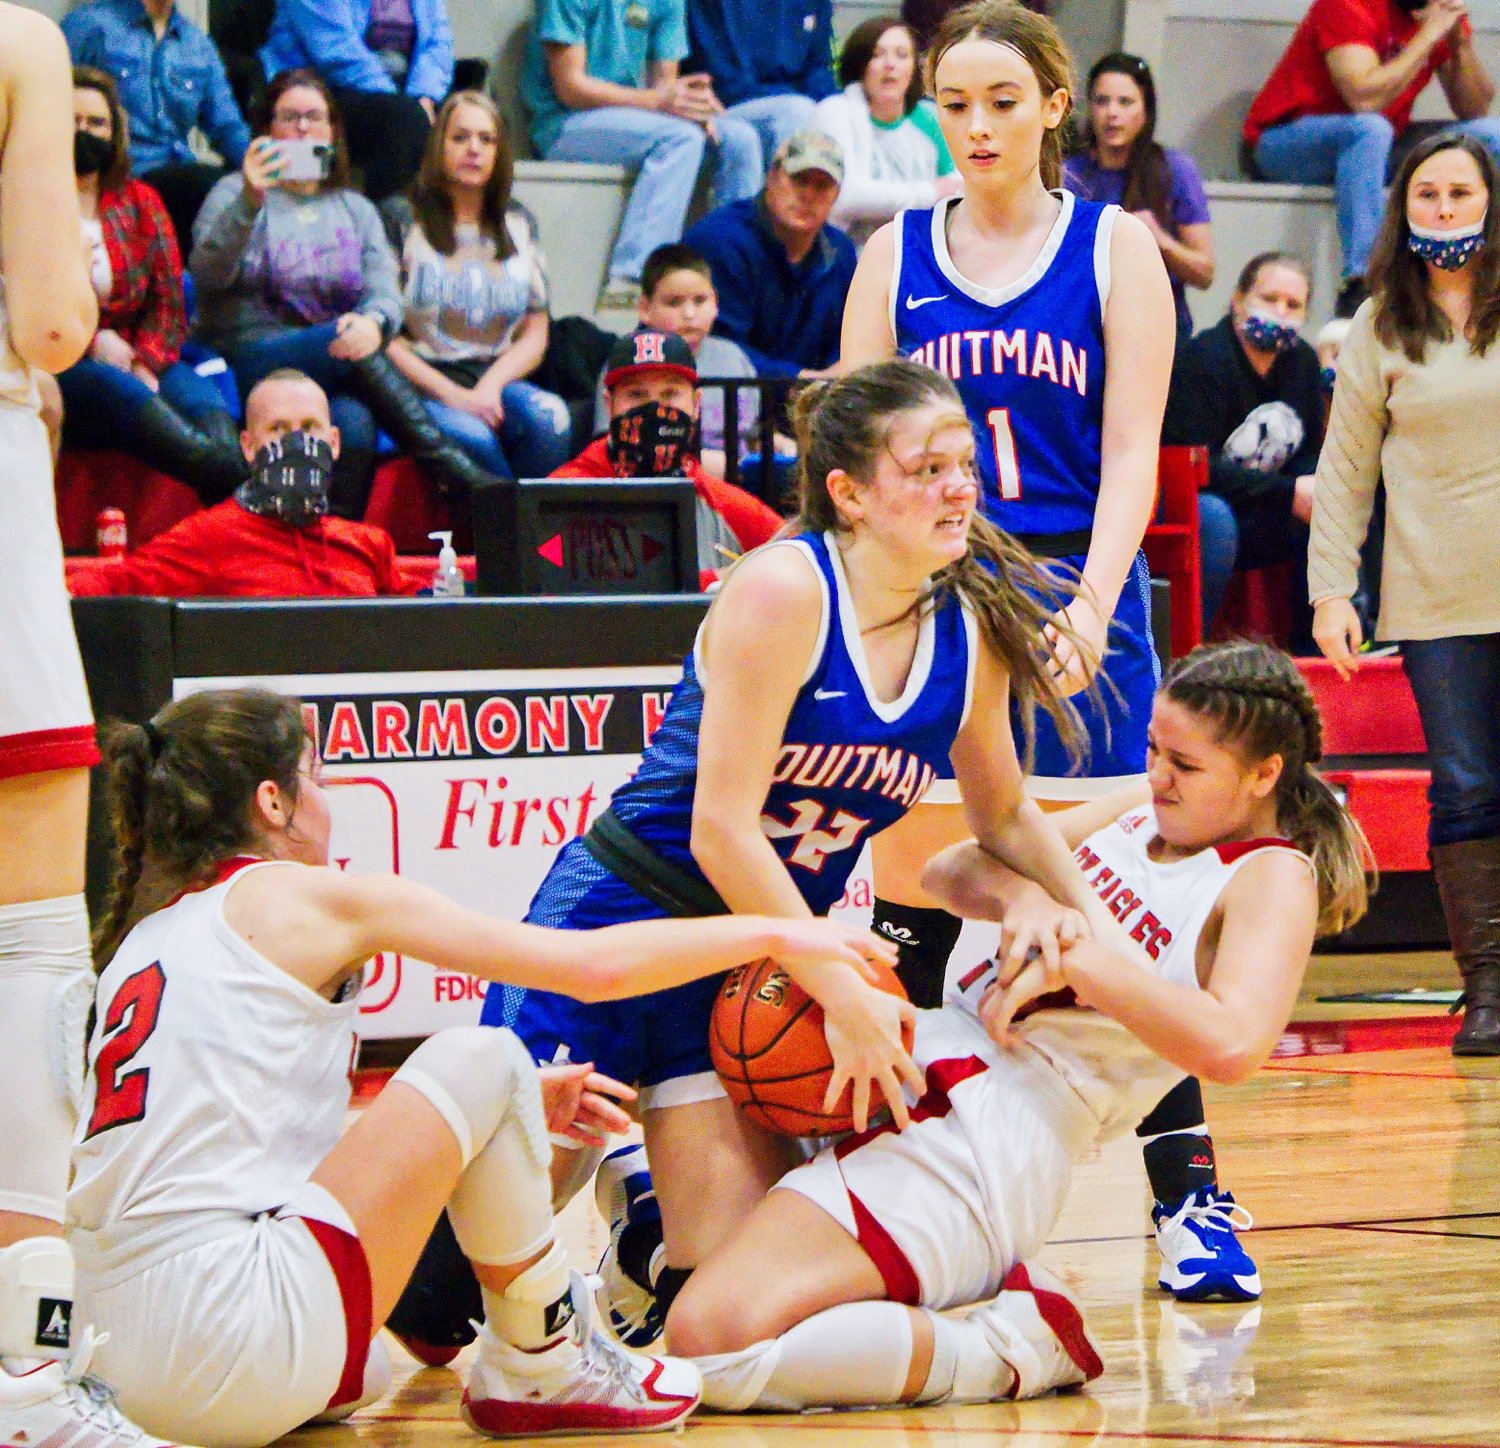 Quitman’s Maddy Pence (22) wrestles for the loose ball with Harmony players Monday. The Lady Bulldogs took a 32-31 win.